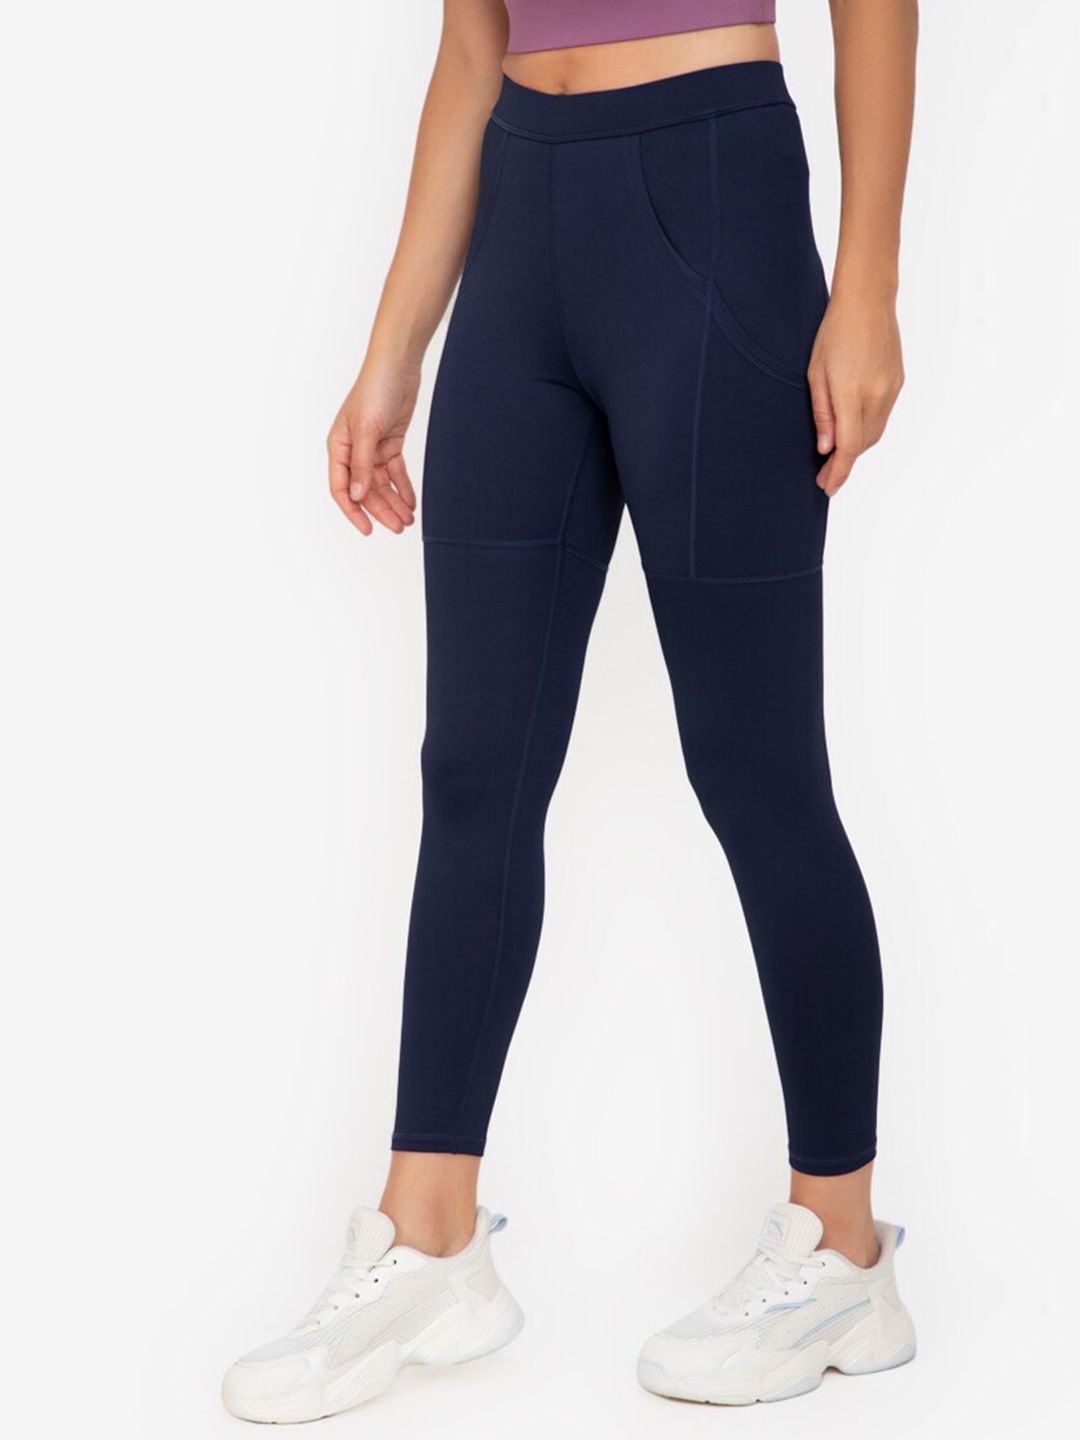 ZALORA ACTIVE Women Navy Blue Sports Tights Price in India